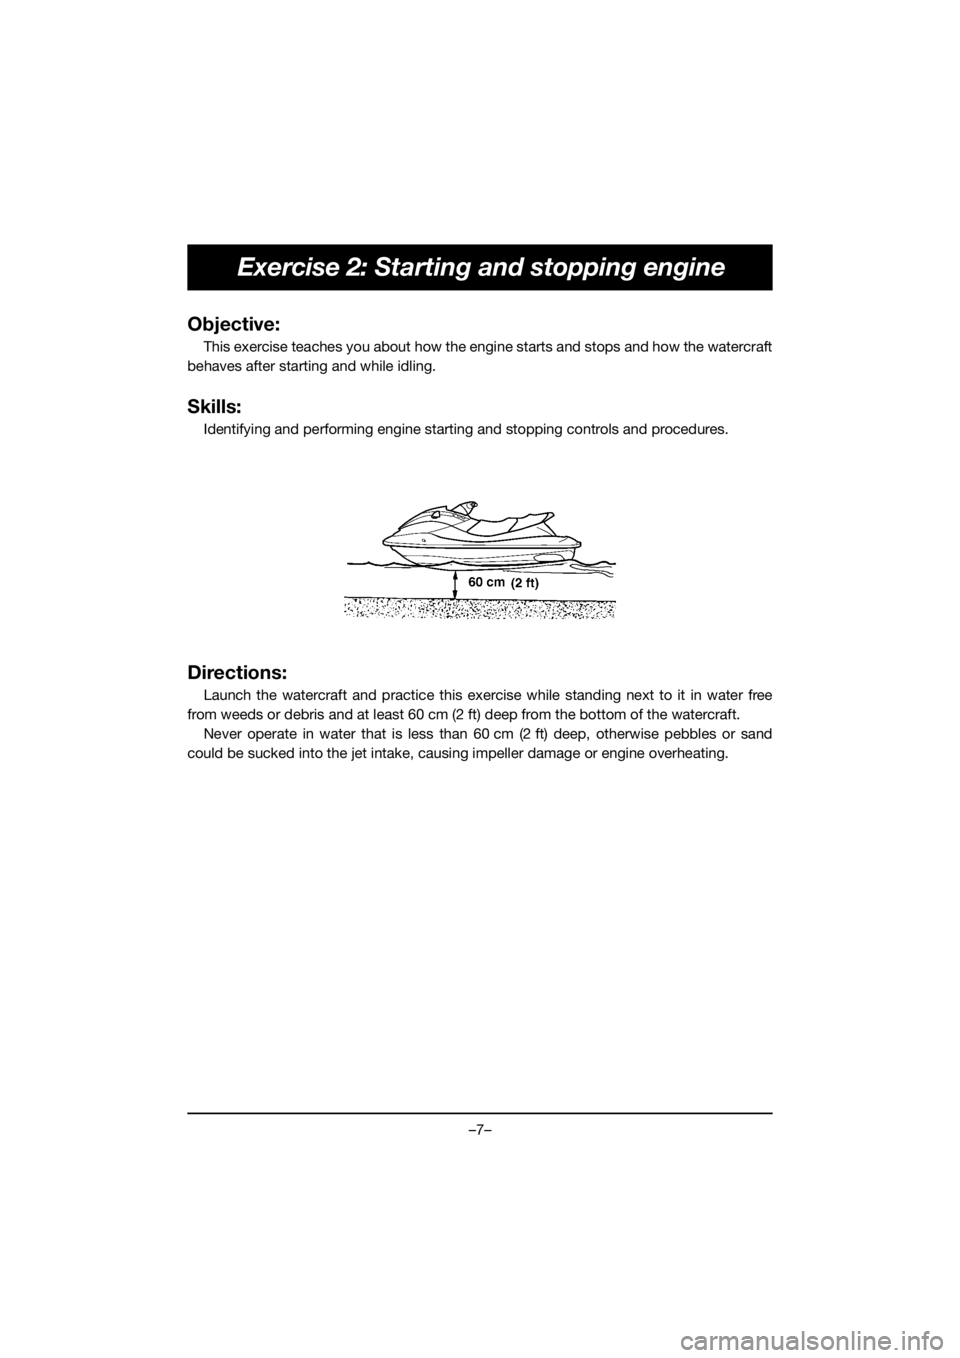 YAMAHA VX DELUXE 2021  Manuale de Empleo (in Spanish) –7–
Exercise 2: Starting and stopping engine
Objective:
This exercise teaches you about how the engine starts and stops and how the watercraft
behaves after starting and while idling.
Skills:
Iden